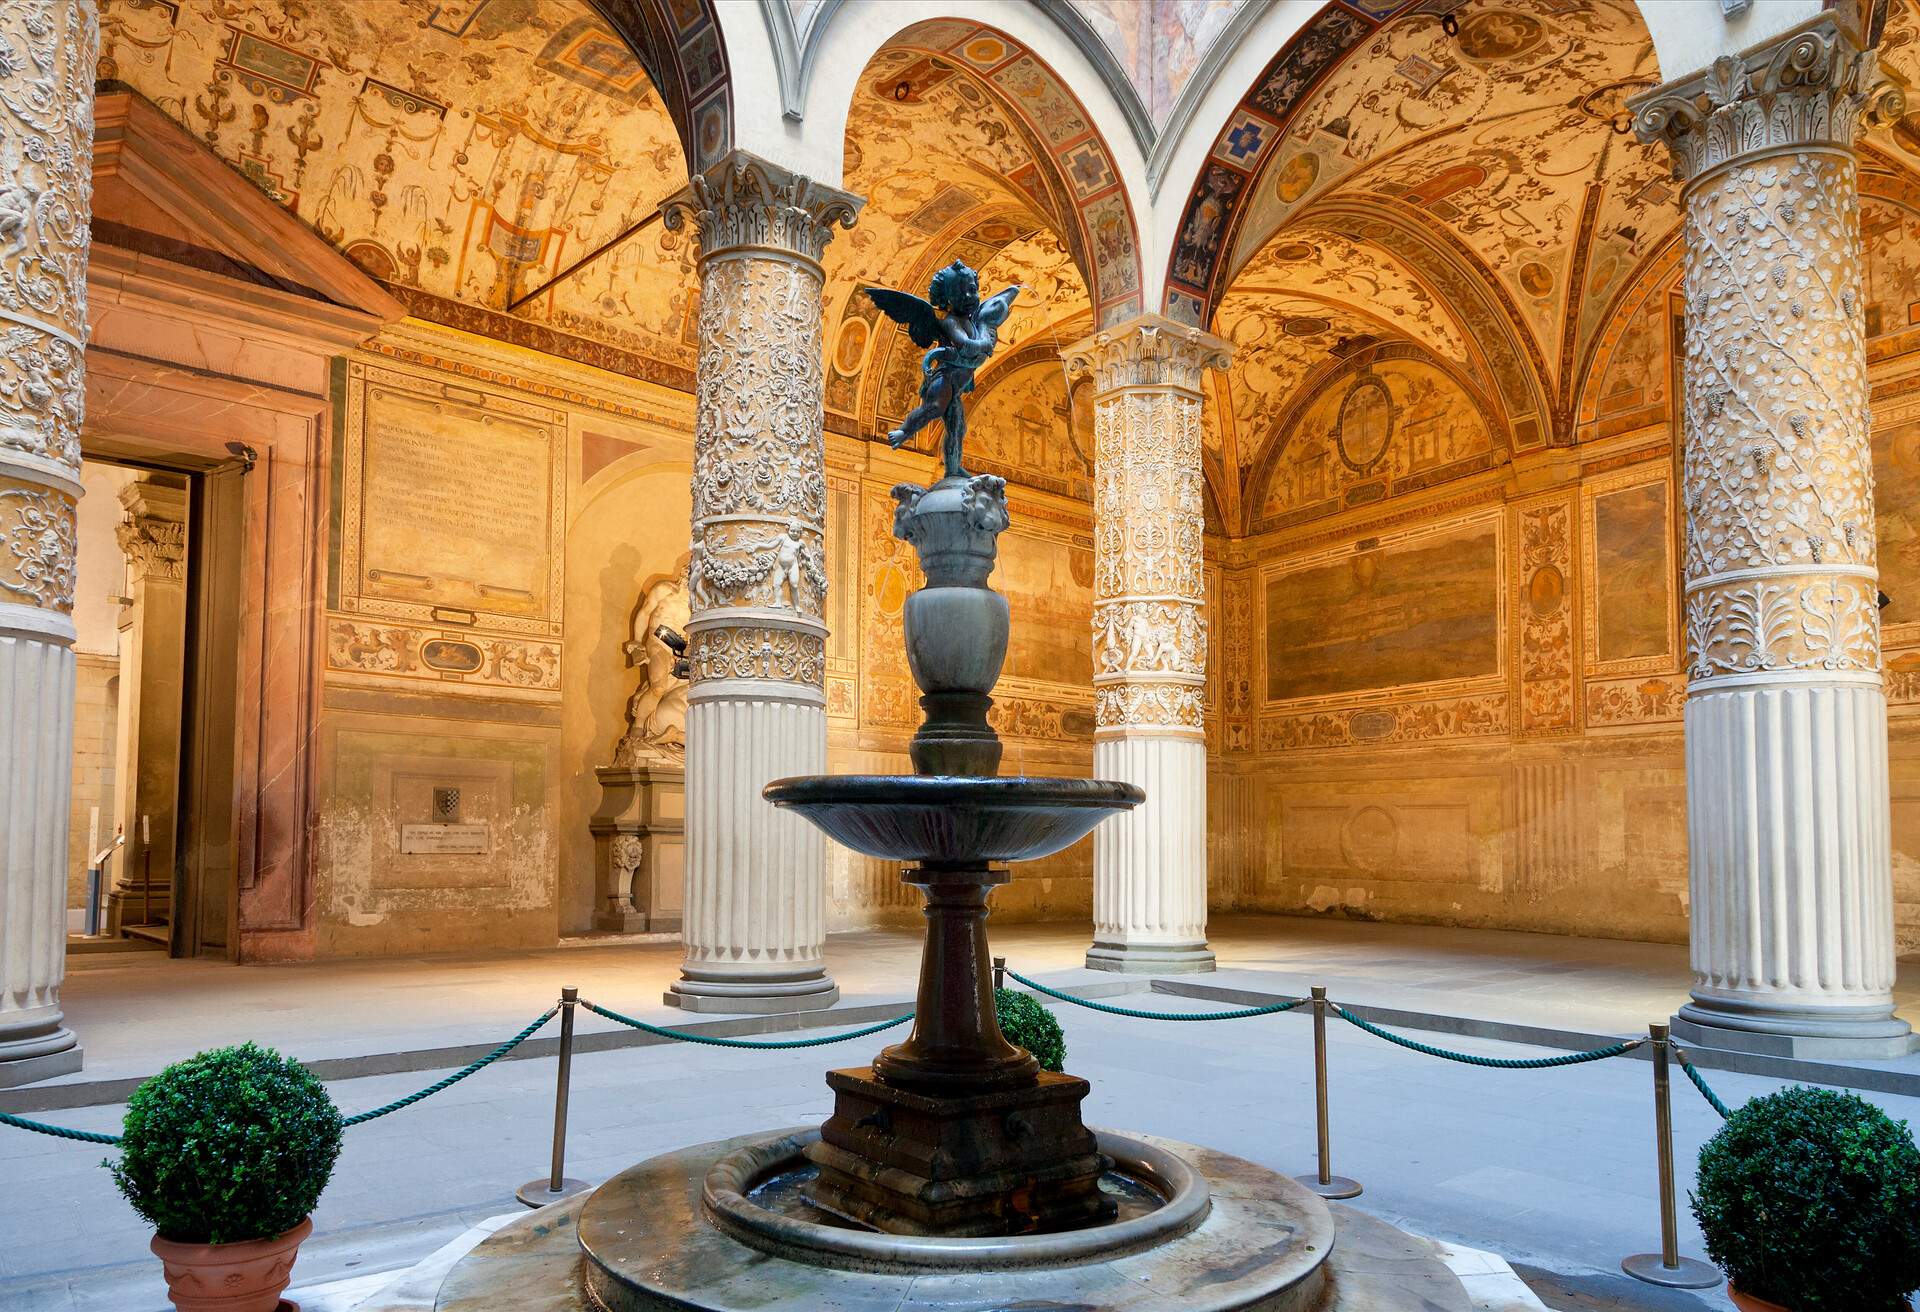 DEST_ITALY_FLORENCE_PALAZZO-VECCHIO_GettyImages-521438248